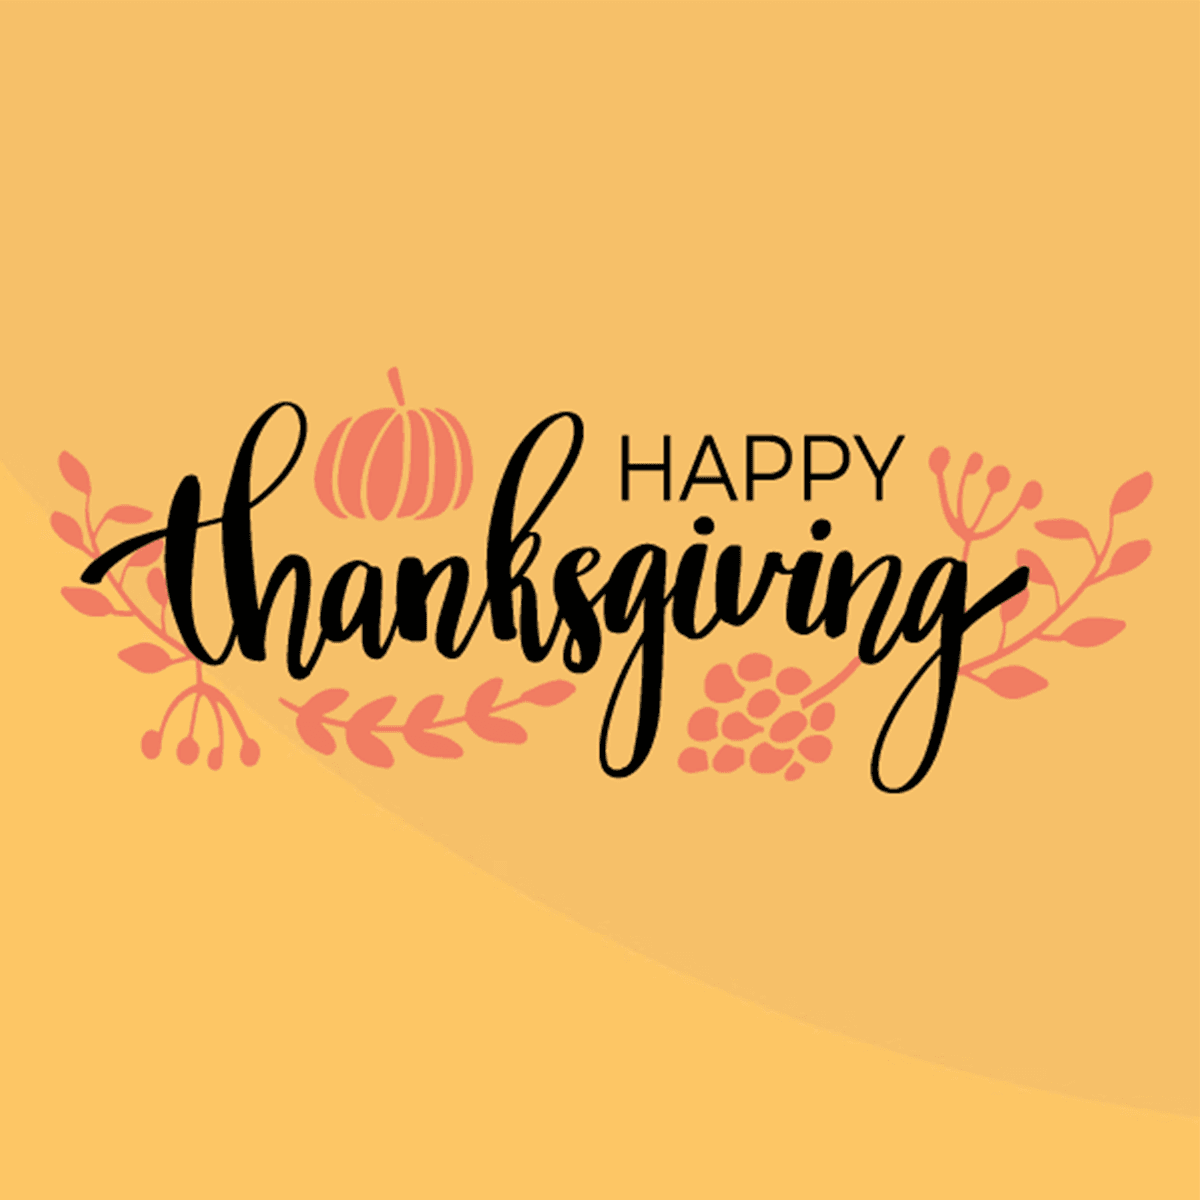 Happy Thanksgiving from TBH Creative